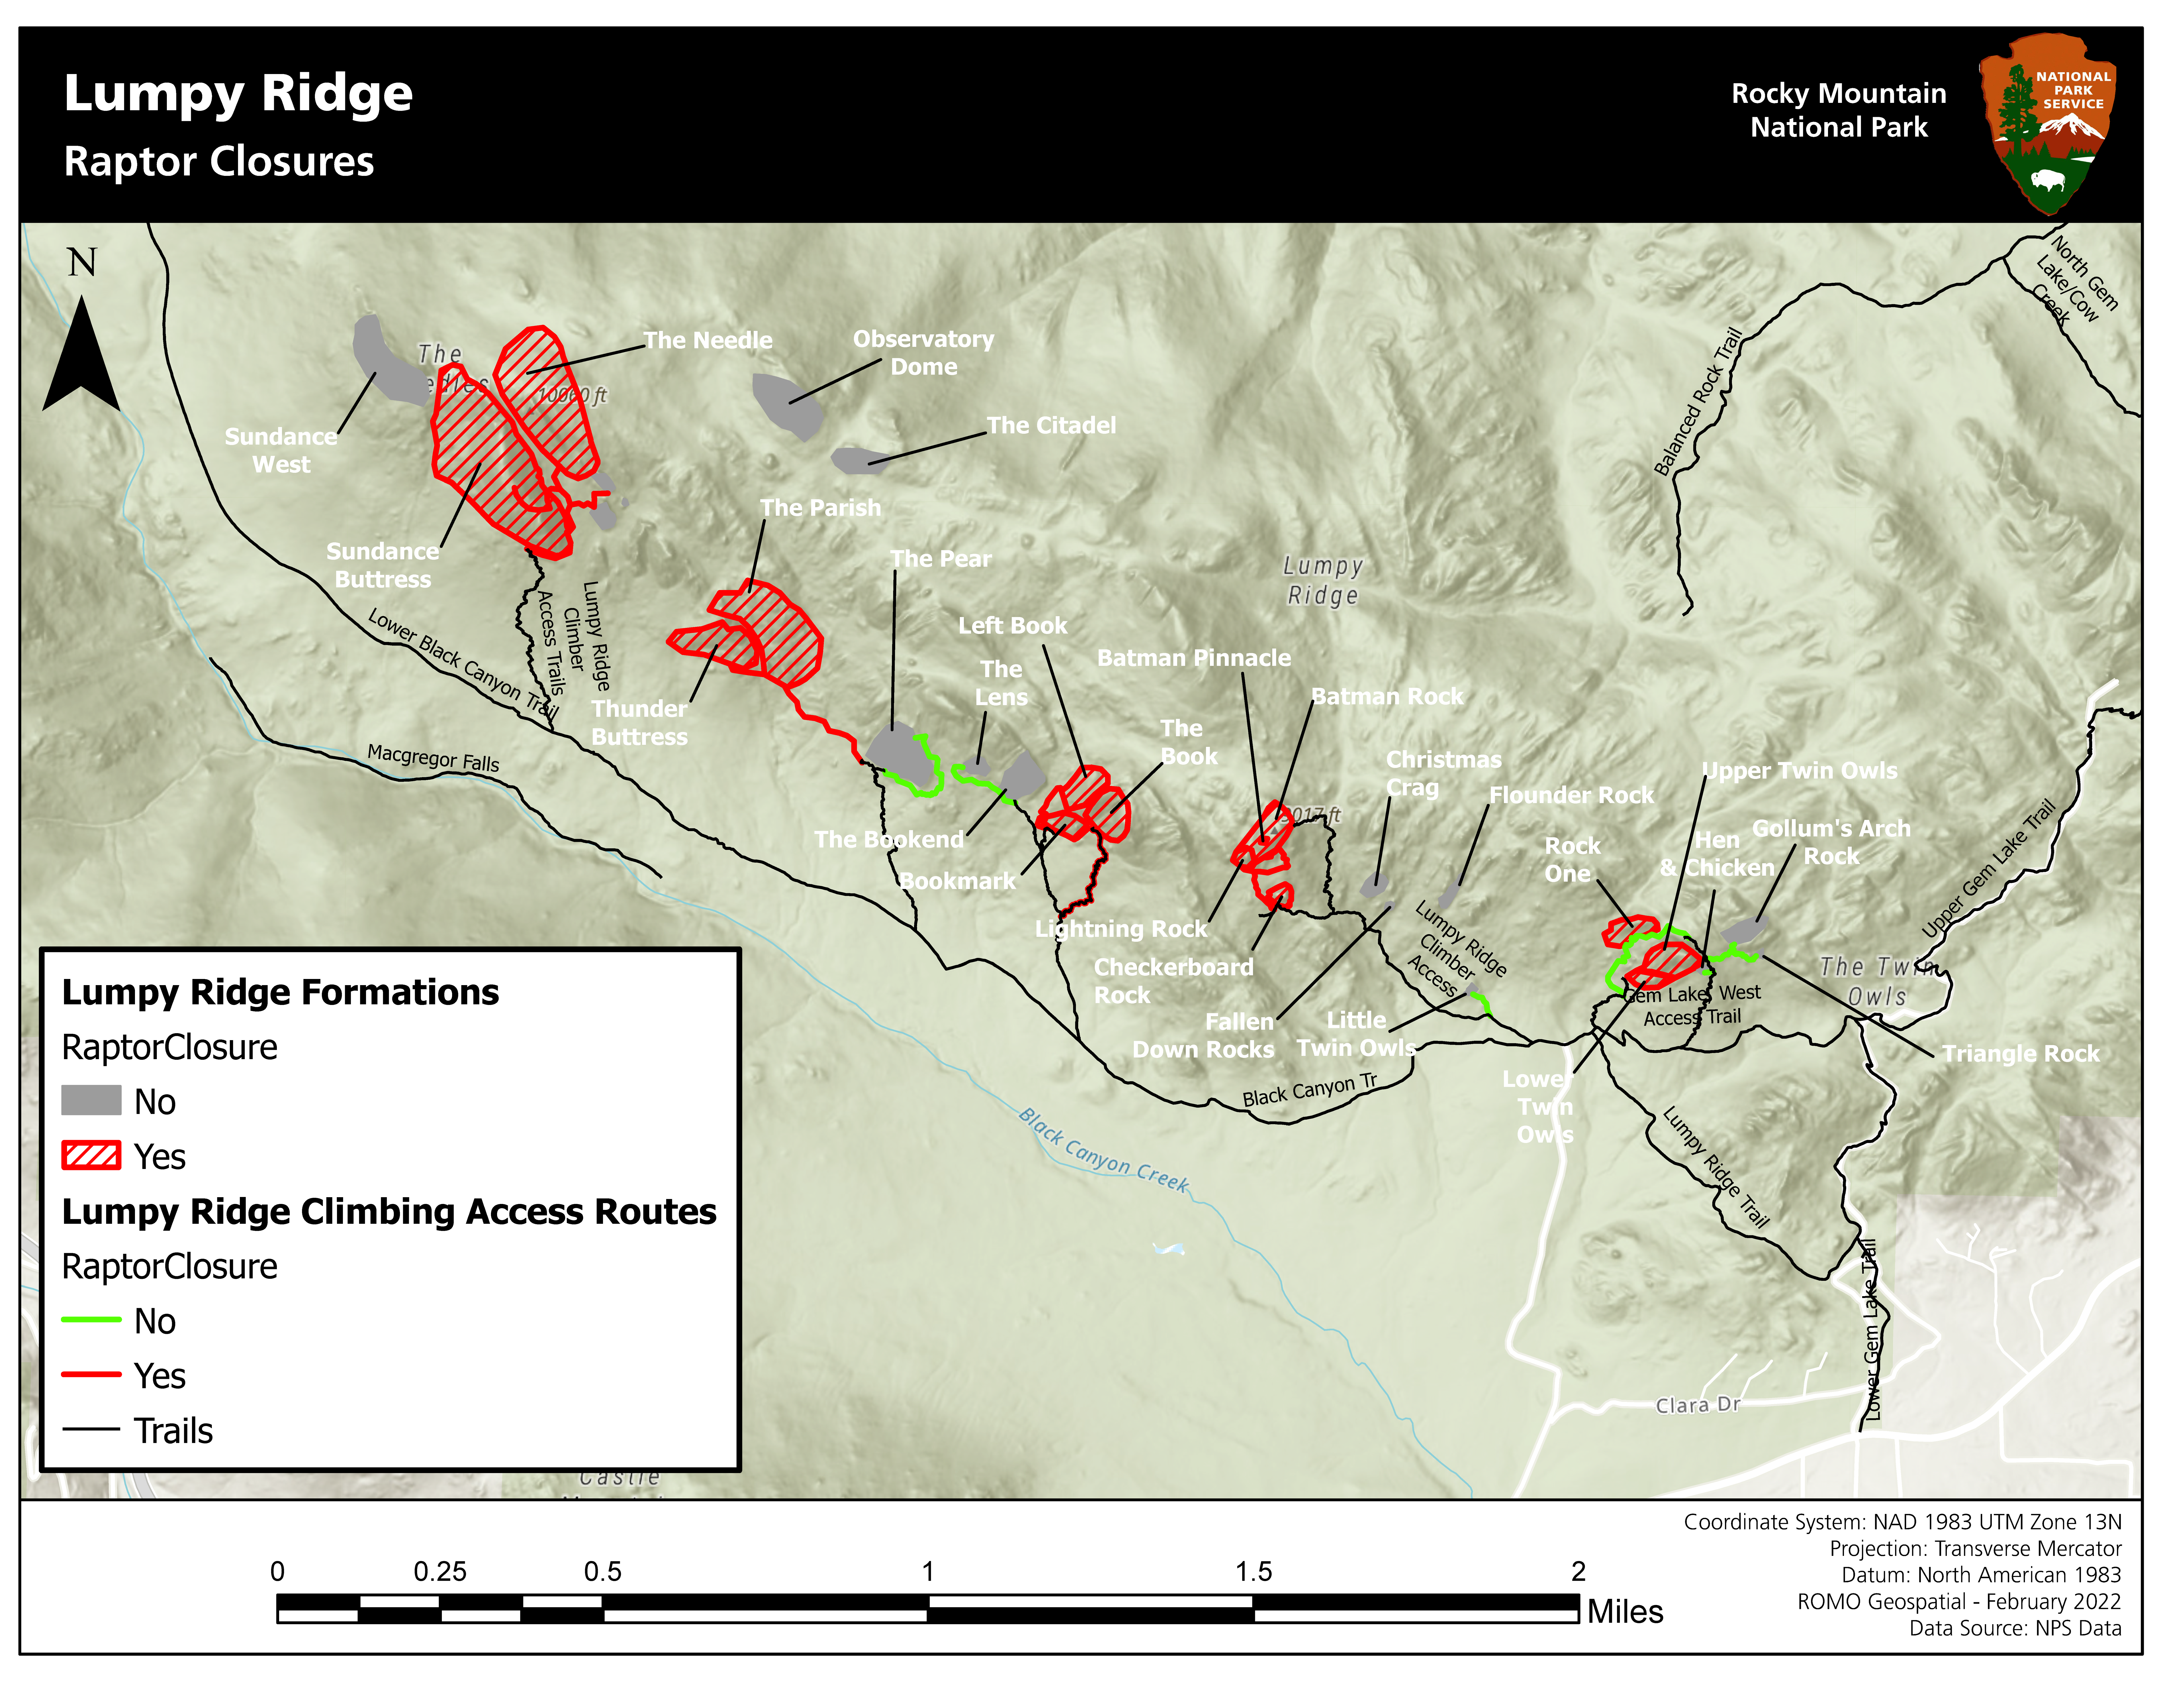 Map of rock climbing formations in the lumpy ridge area that are closed for raptors